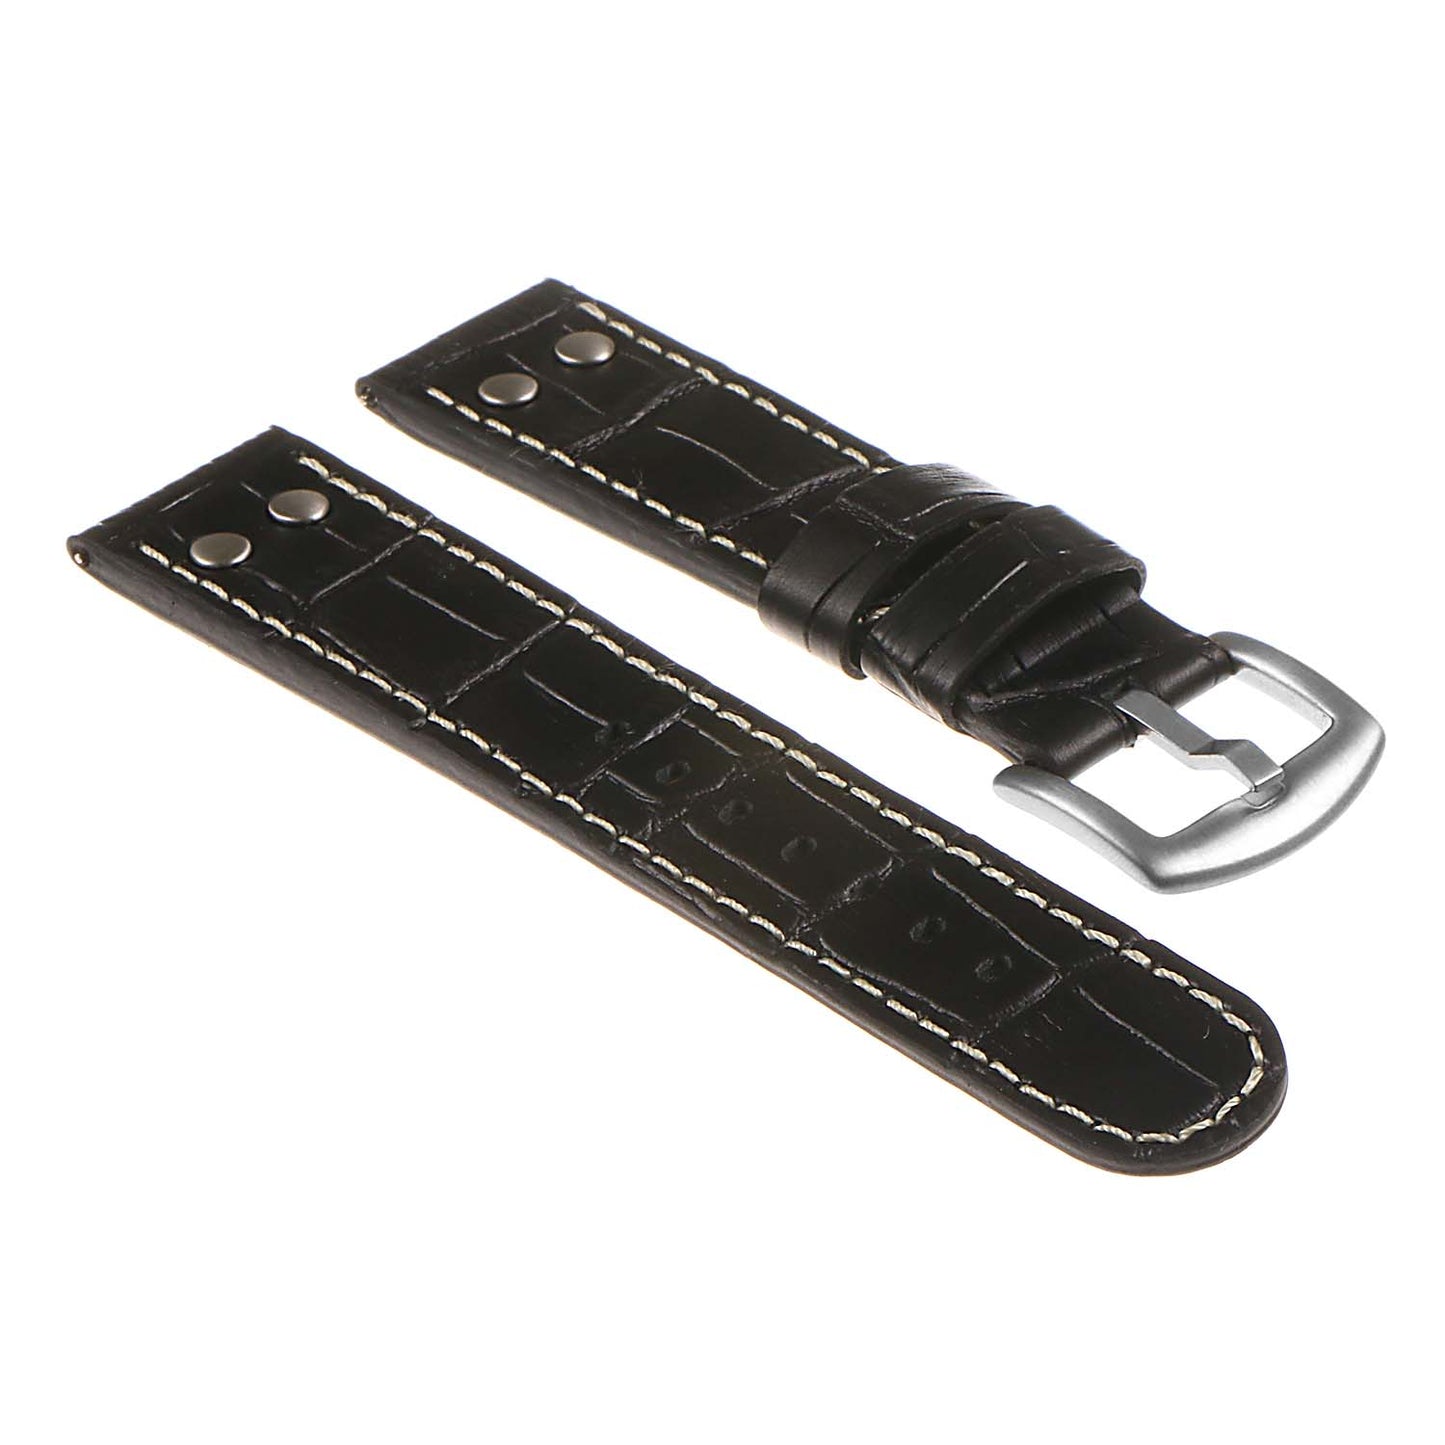 DASSARI Croc Embossed Leather Pilot Watch Band w/ Rivets for Apple Watch